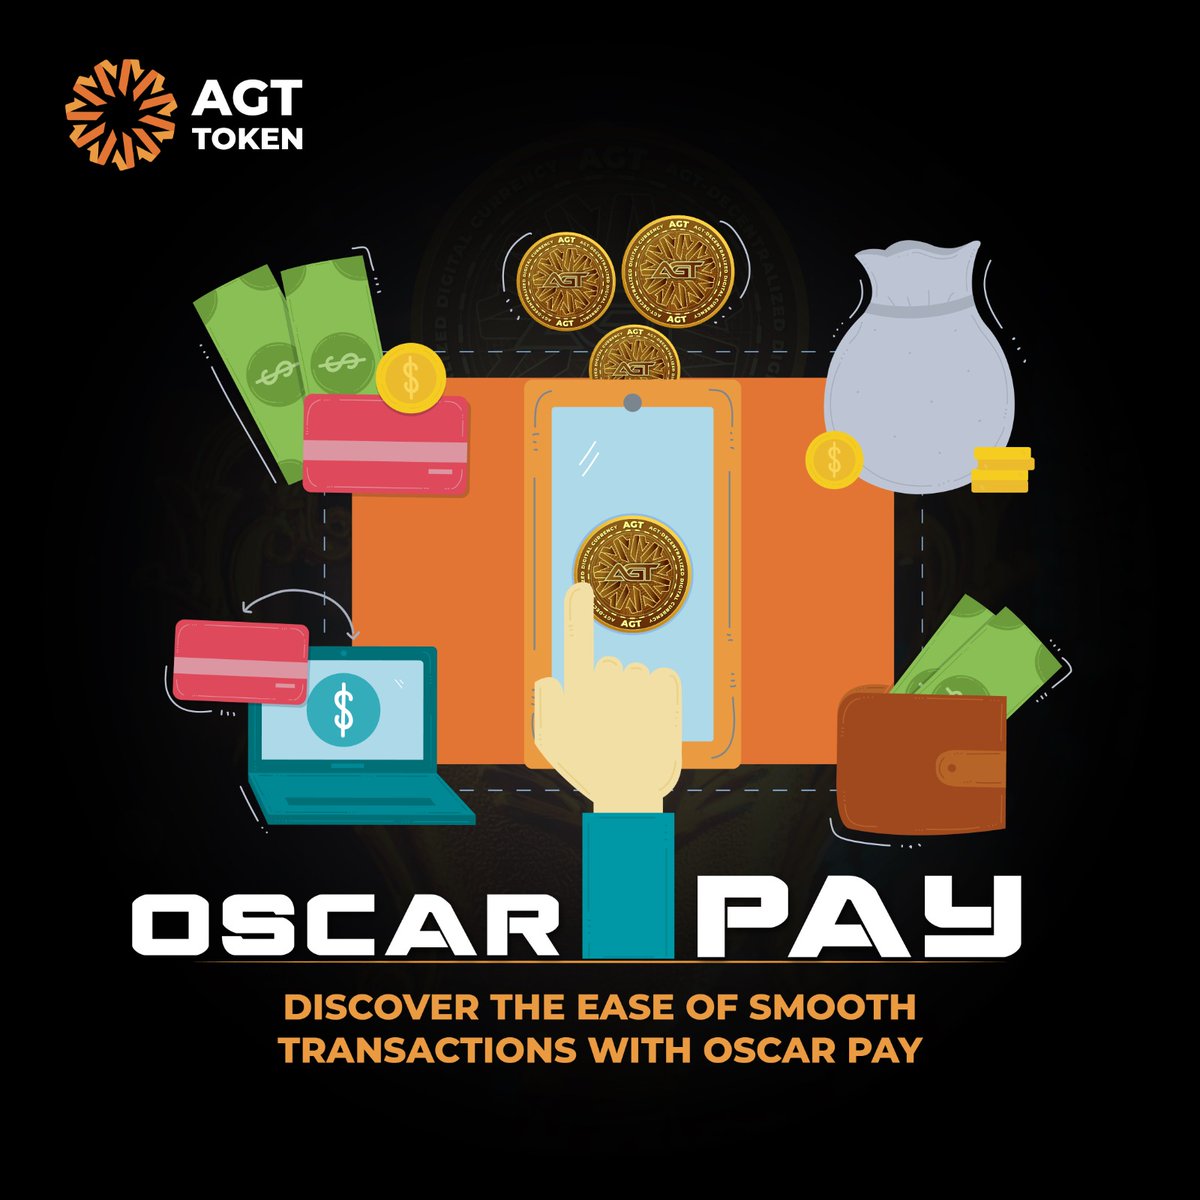 Experience the future of effortless transactions with Oscar Pay! 🌐✨ 

AGT Token is your passport to seamless financial journeys. 

Say hello to convenience, wave goodbye to complications! 💳💼 

#OscarPay #AGTToken #SmoothTransactions #CryptoRevolution #FreeSignUp #AirDrop